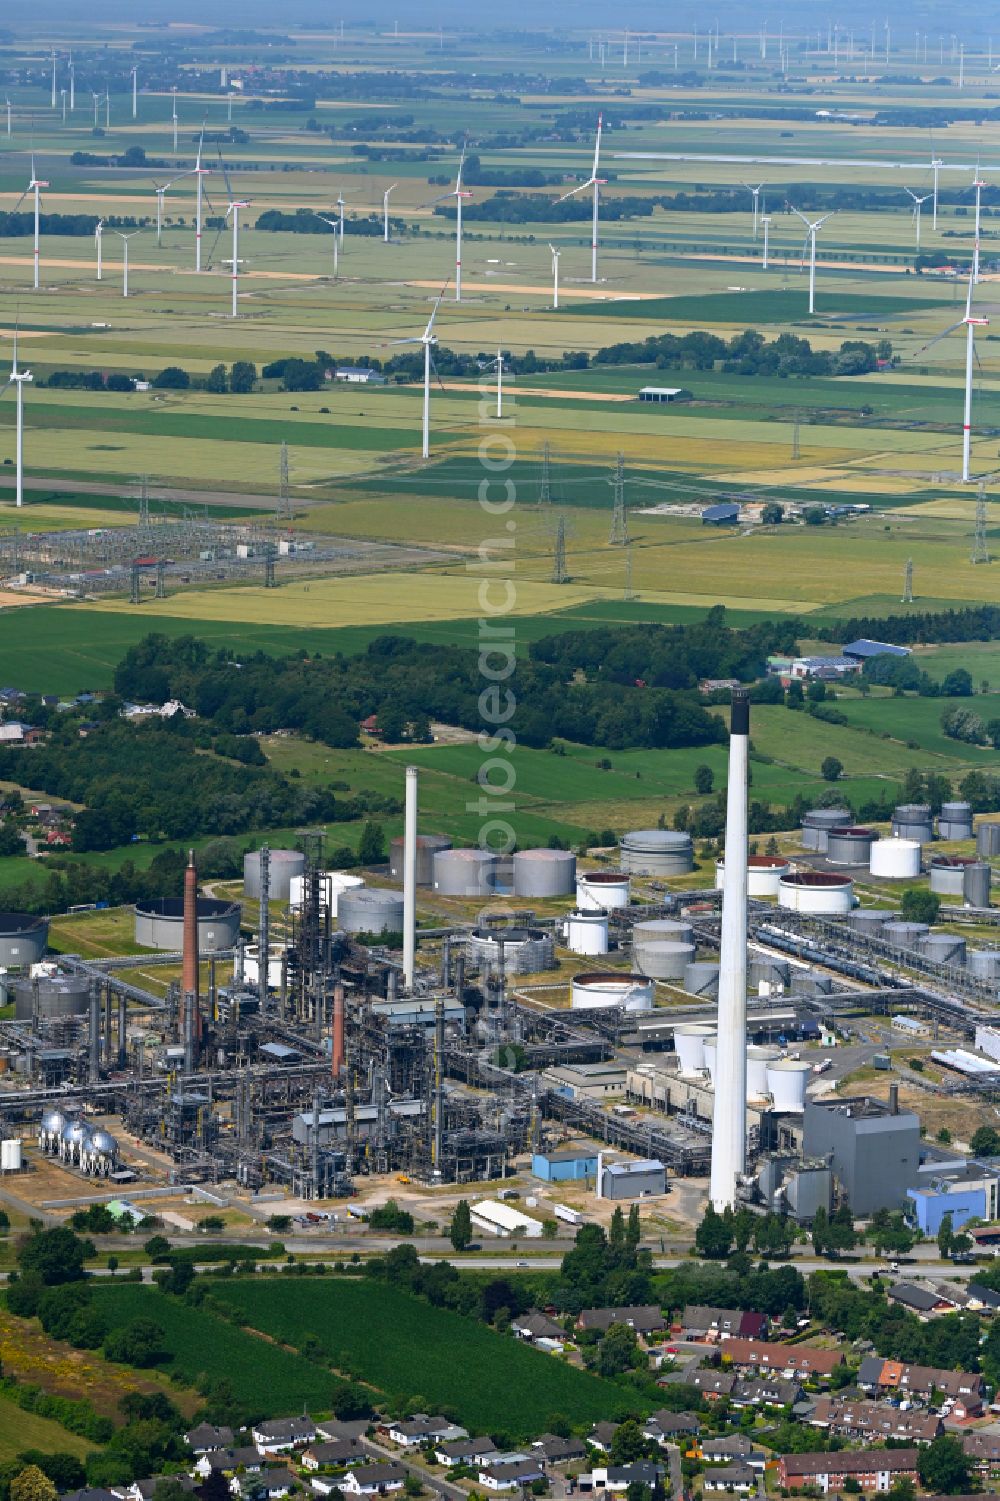 Hemmingstedt from the bird's eye view: Panoramic perspective of refinery equipment and management systems on the factory premises of the mineral oil producer Heide Refinery GmbH in Hemmingstedt in Schleswig-Holstein. The northernmost refinery in Germany is one of the most modern plants in Europe